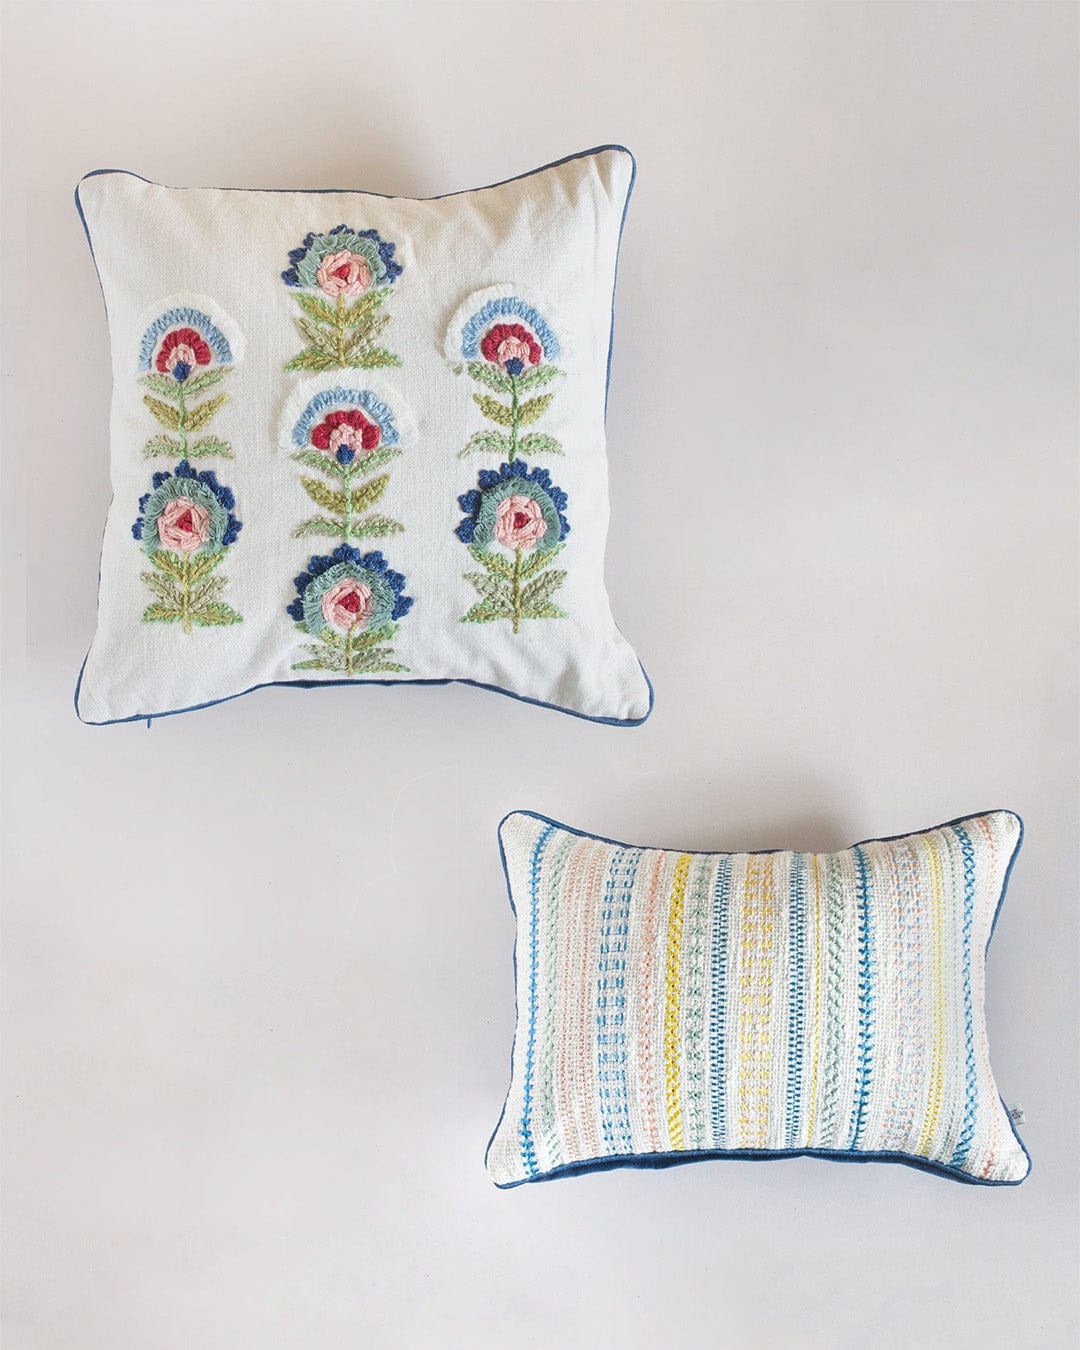 Powder Blue Cushion Covers Collection - Set of 2